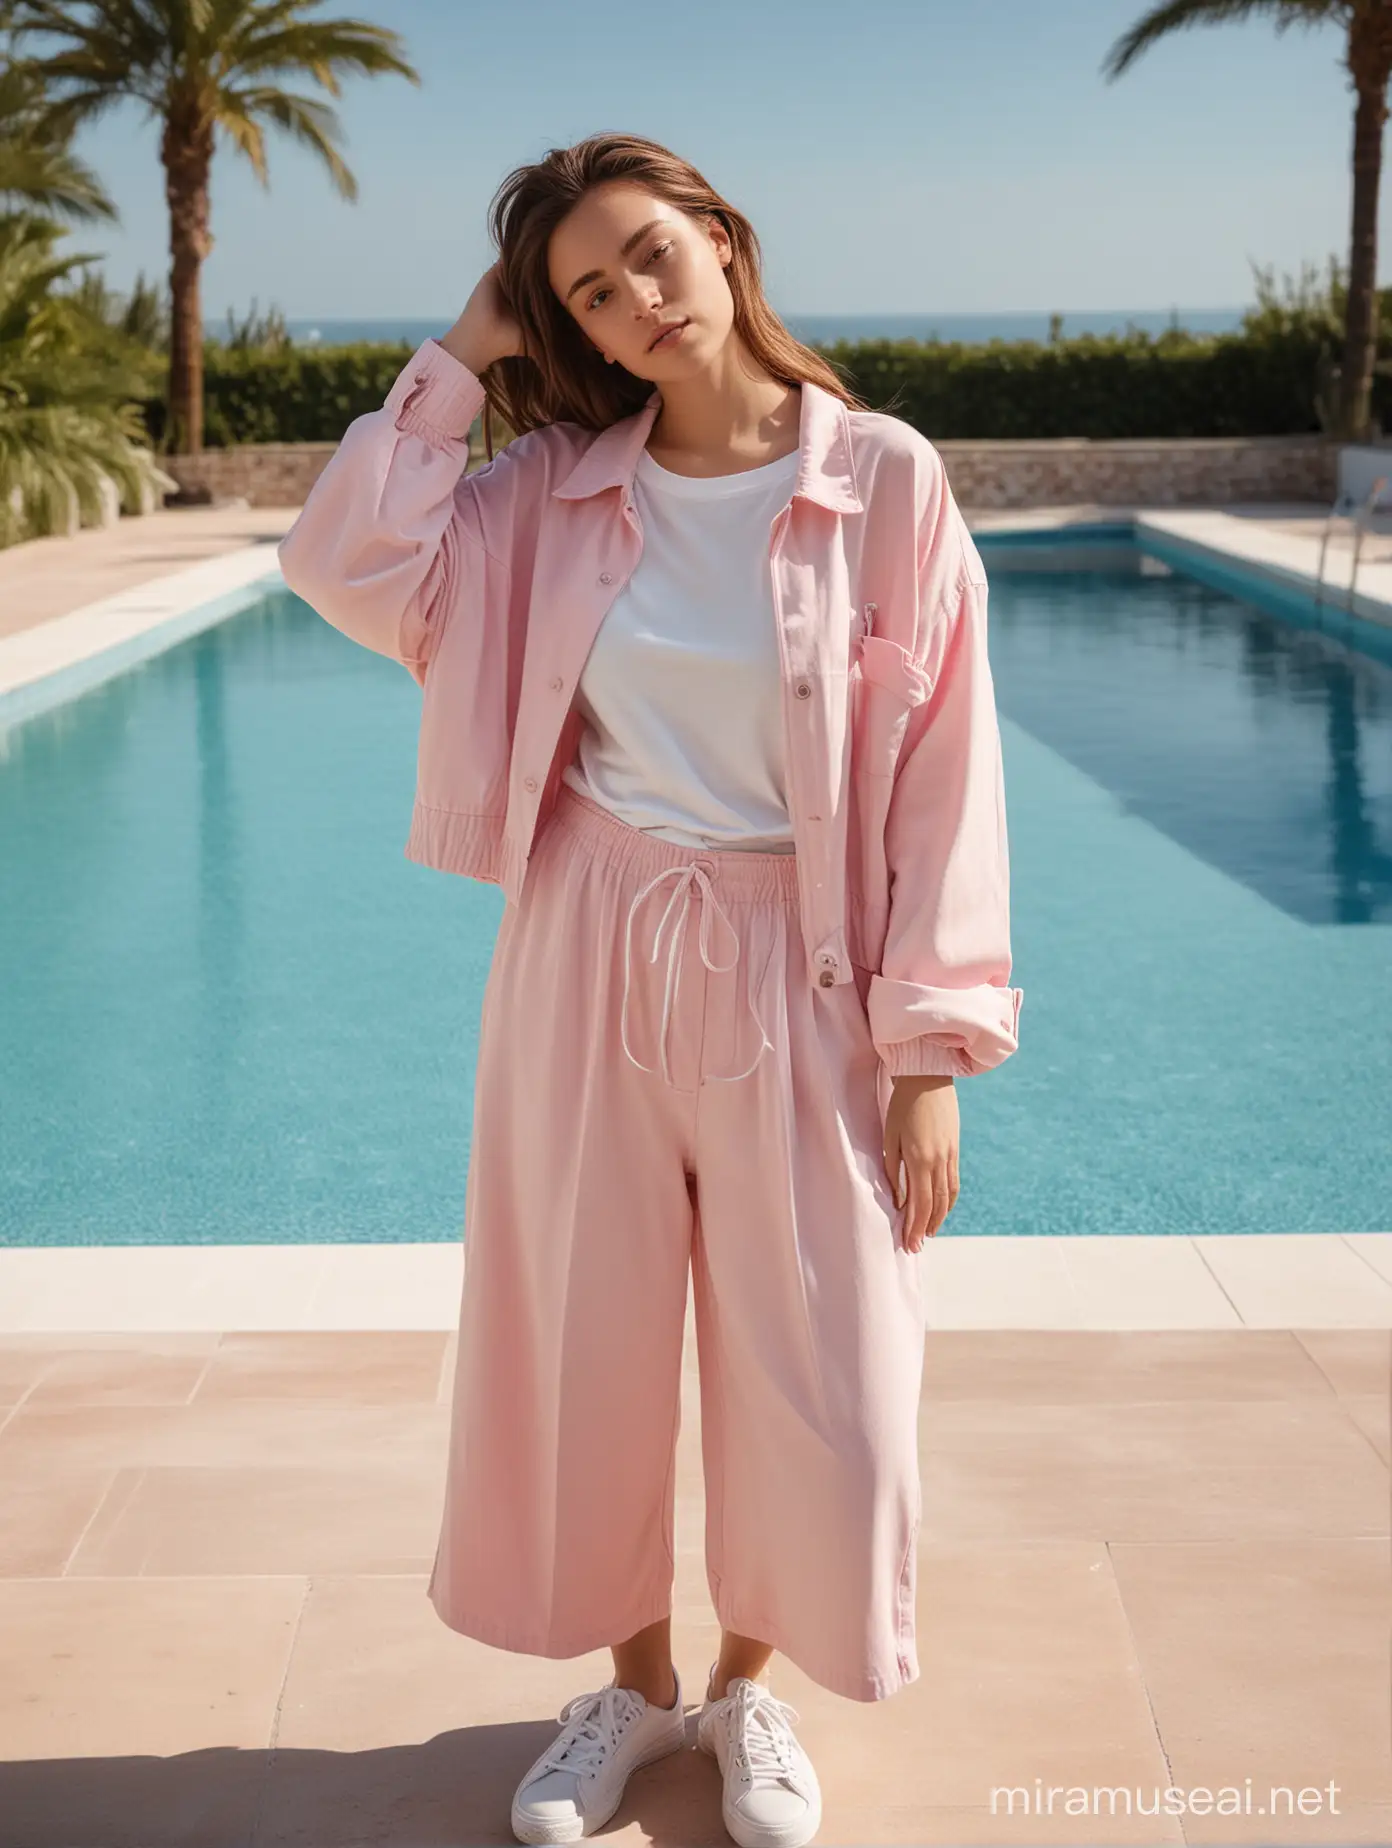 Young woman wearing oversize jacket, t-shirt and trousers by the pool. wide viewing angle. Basic background. soft reverse sunlight.  The photo features soft pink and blue. Summer vibe and editorial pose.